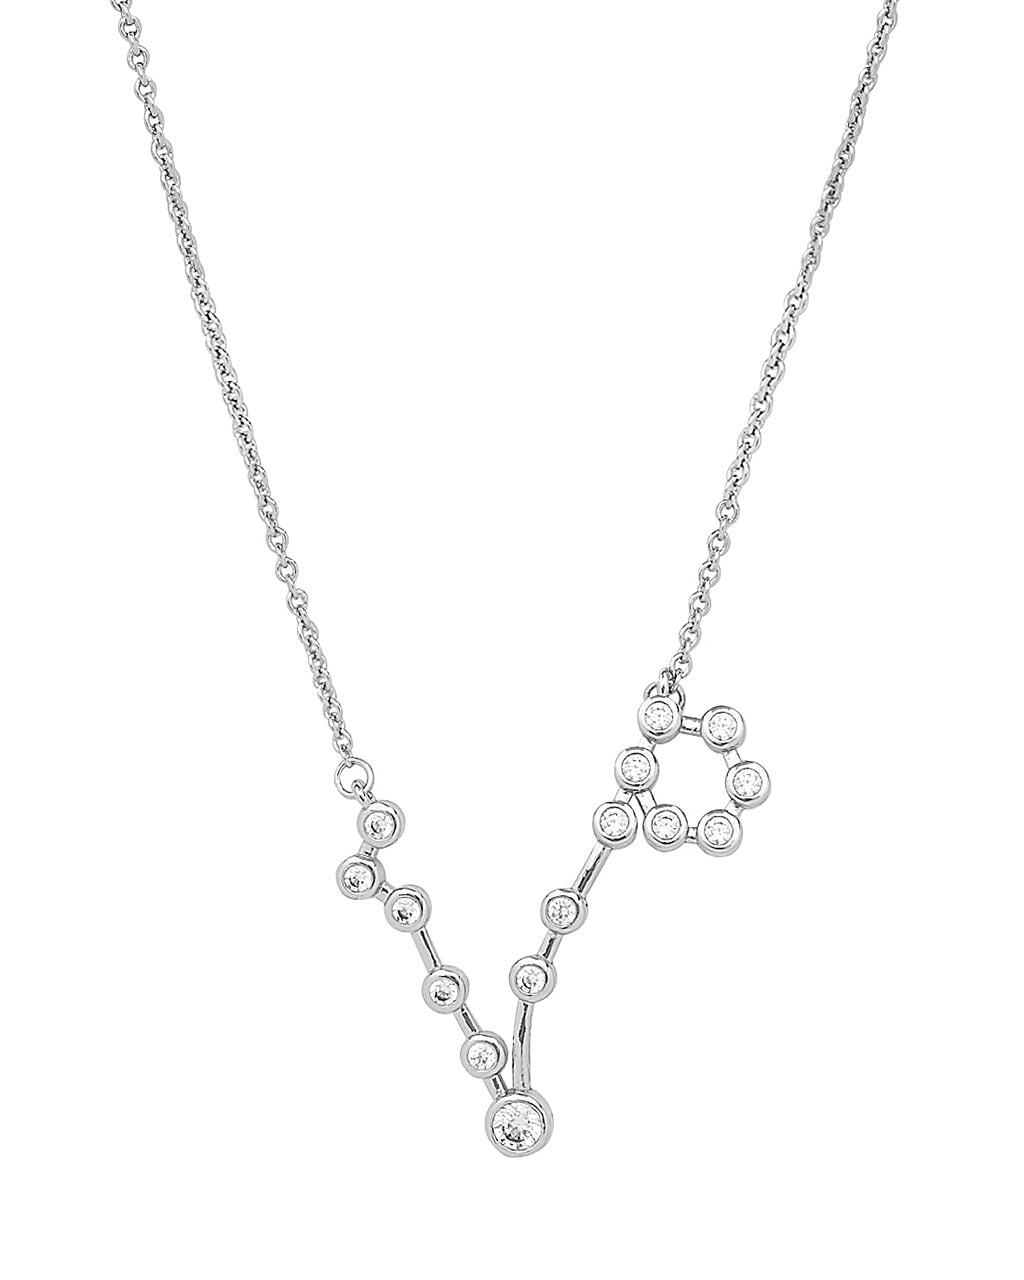 'When Stars Align' Constellation Necklace Necklace Sterling Forever Silver Pisces (Feb 19 - Mar 20) 